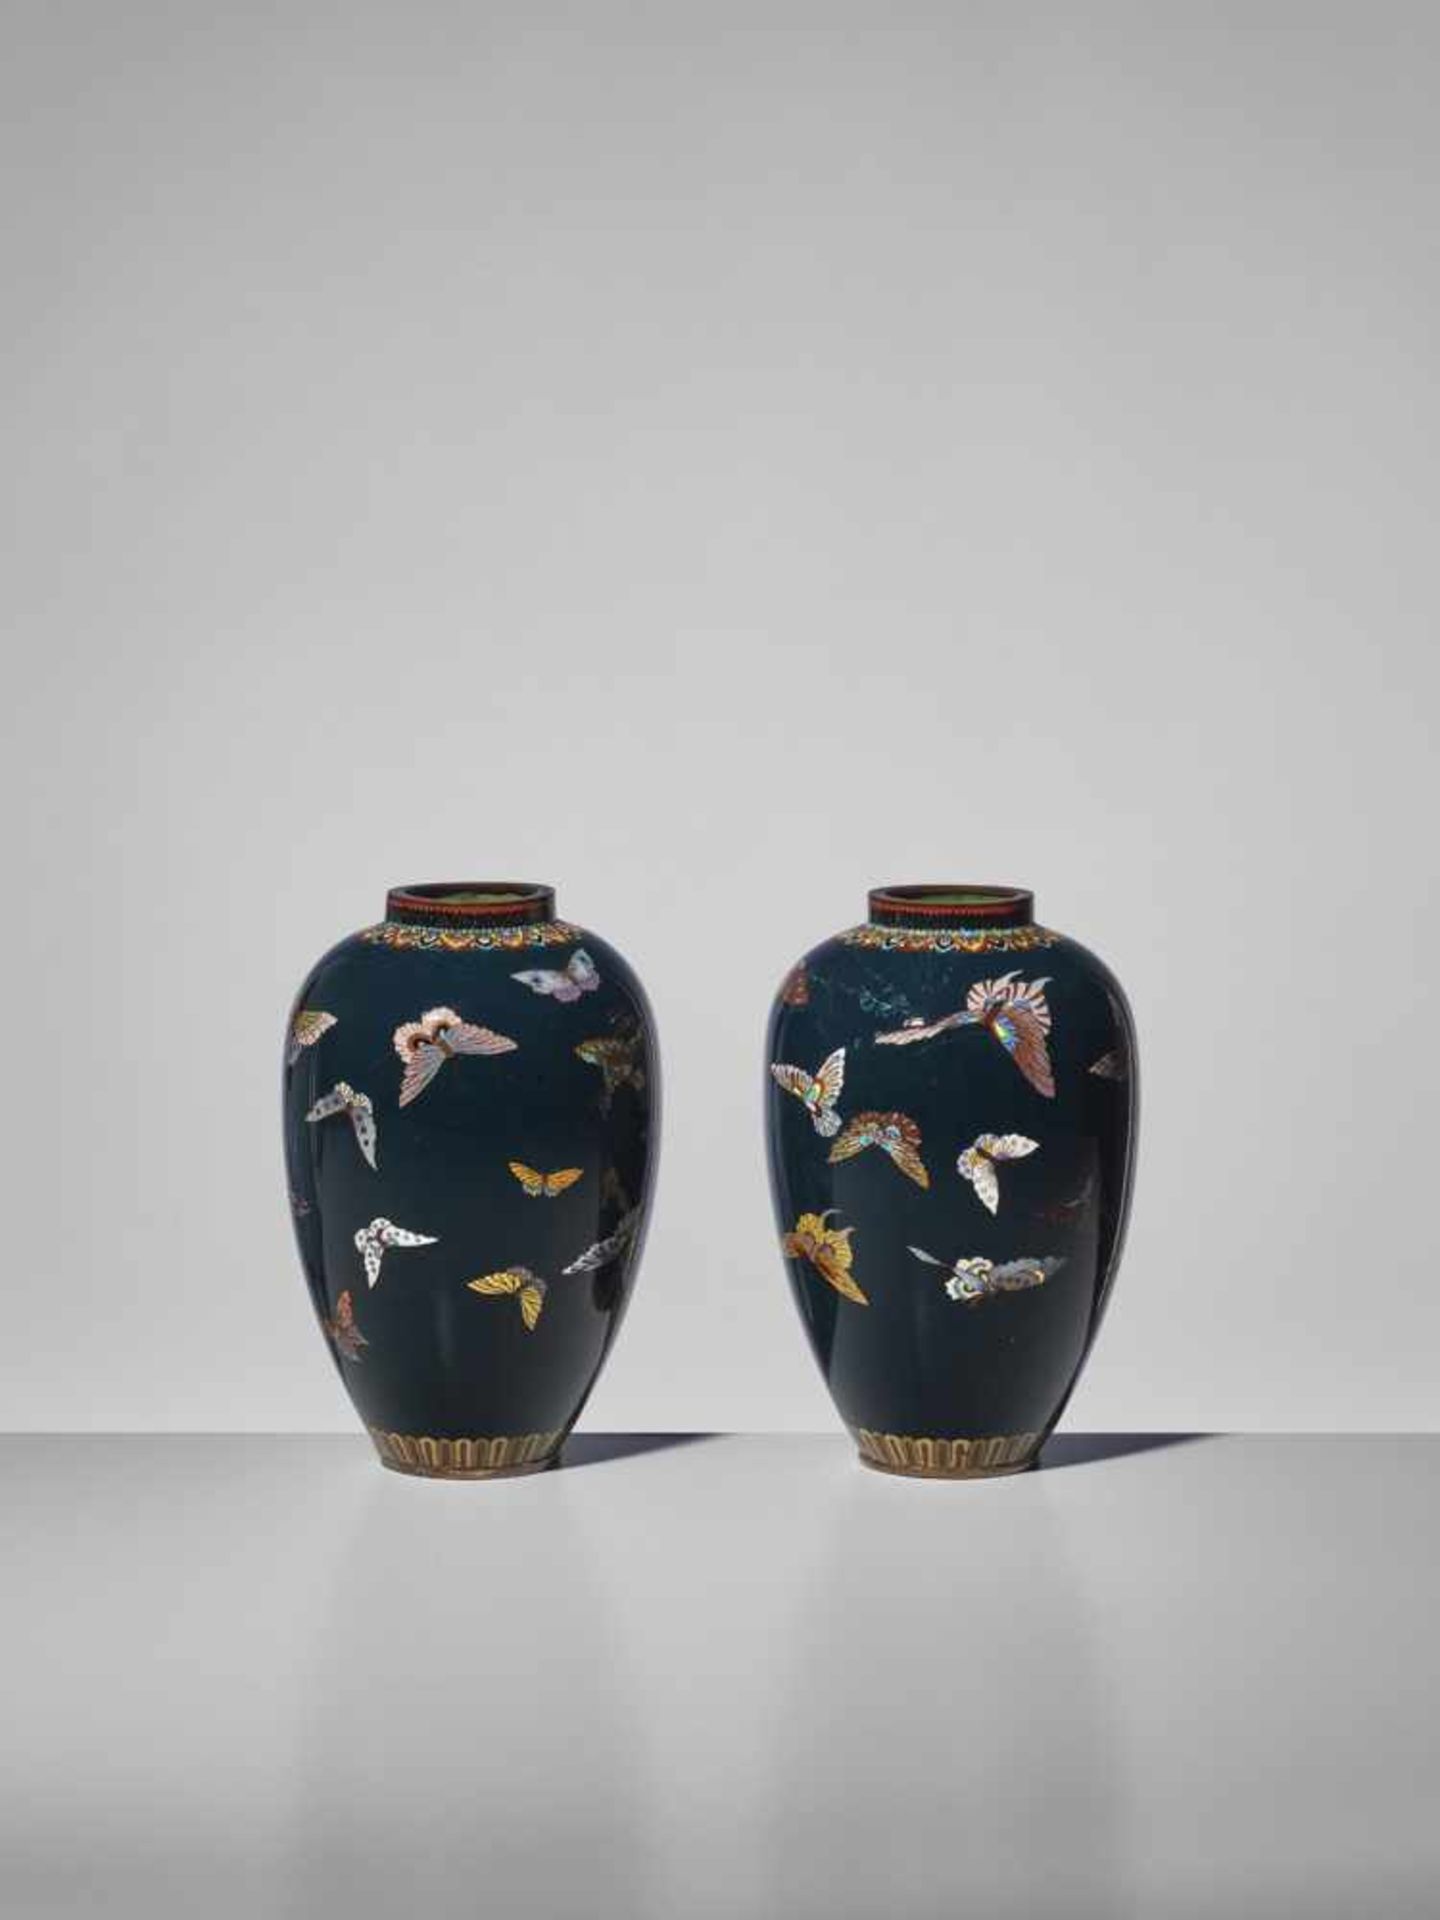 A PAIR OF CLOISONNE ENAMEL VASES WITH BUTTERFLIES - Image 2 of 6